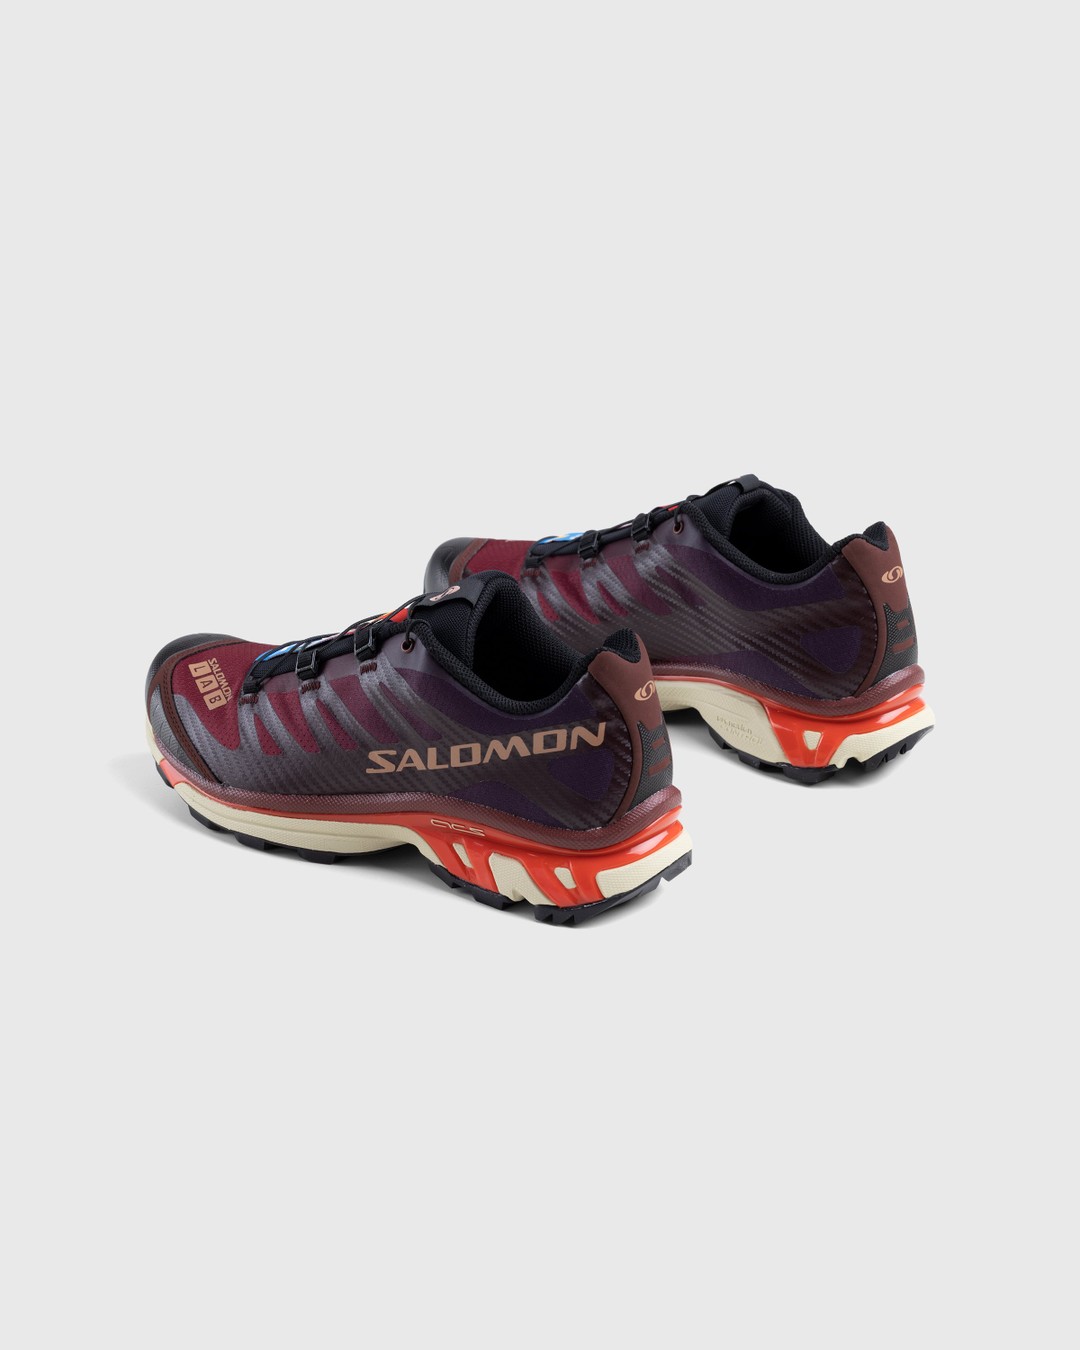 Salomon – XT-4 Bitter Chocolate/Mocha Mousse/Fiery Red - Sneakers - Red - Image 4